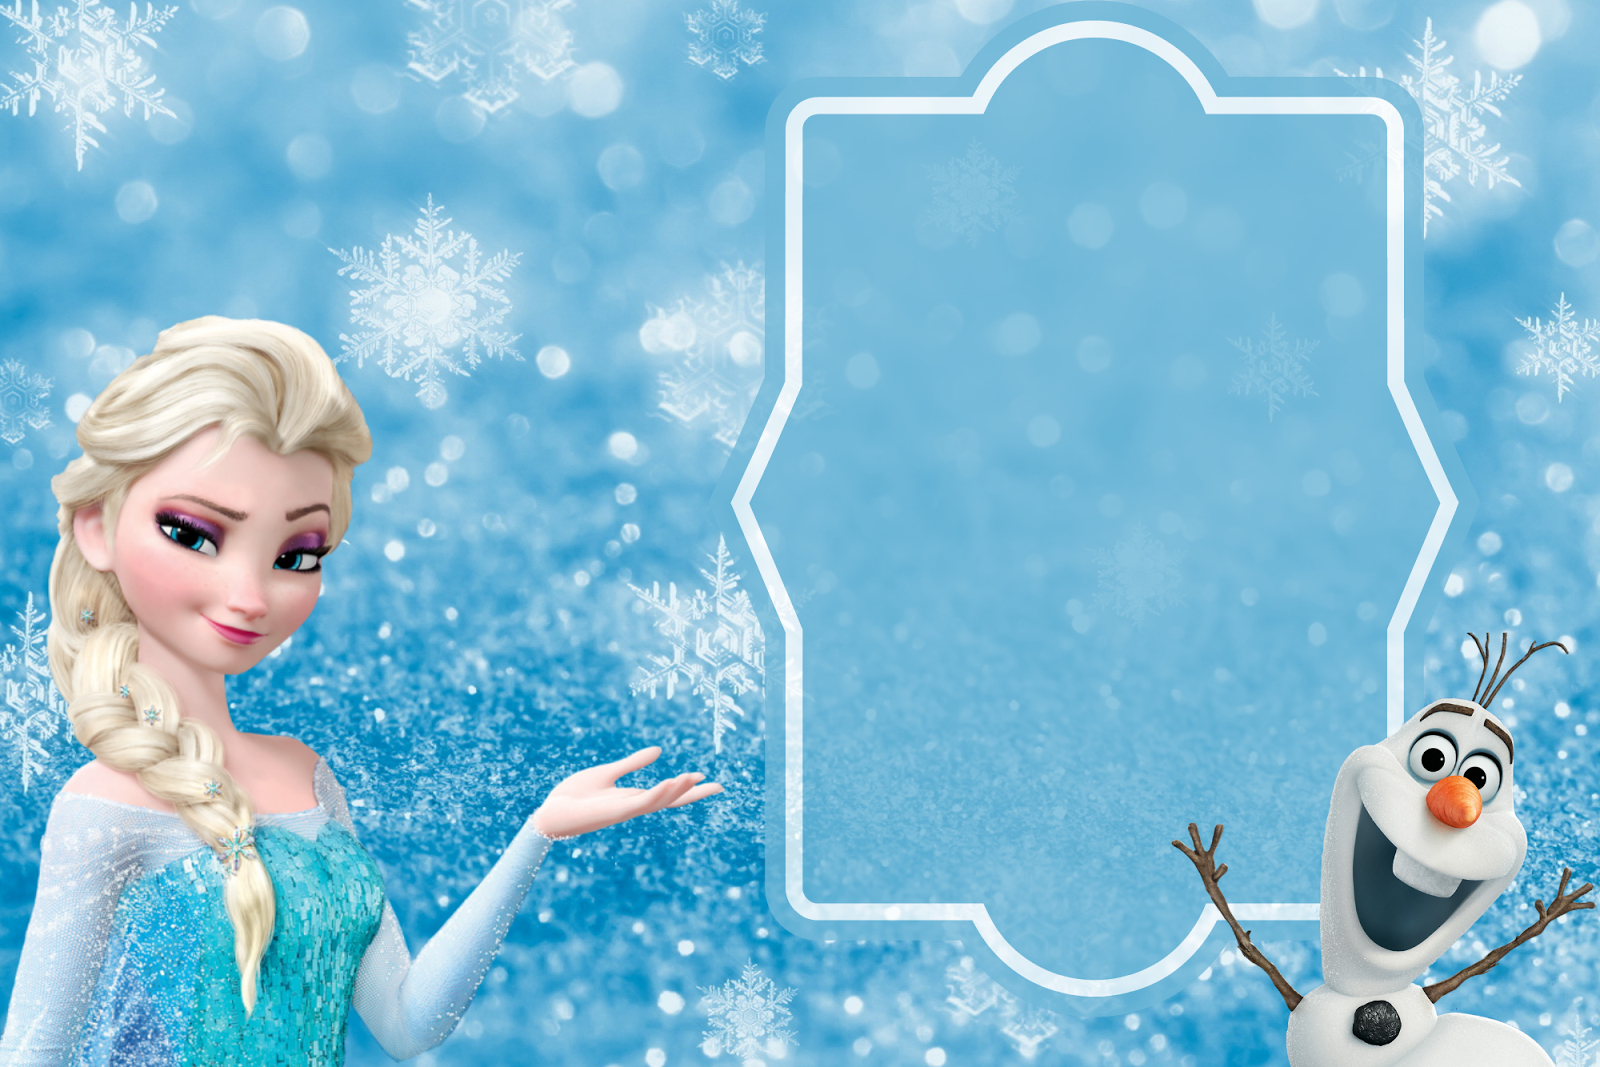 Free Frozen Party Invitation Template Download Party Ideas And throughout dimensions 1600 X 1067